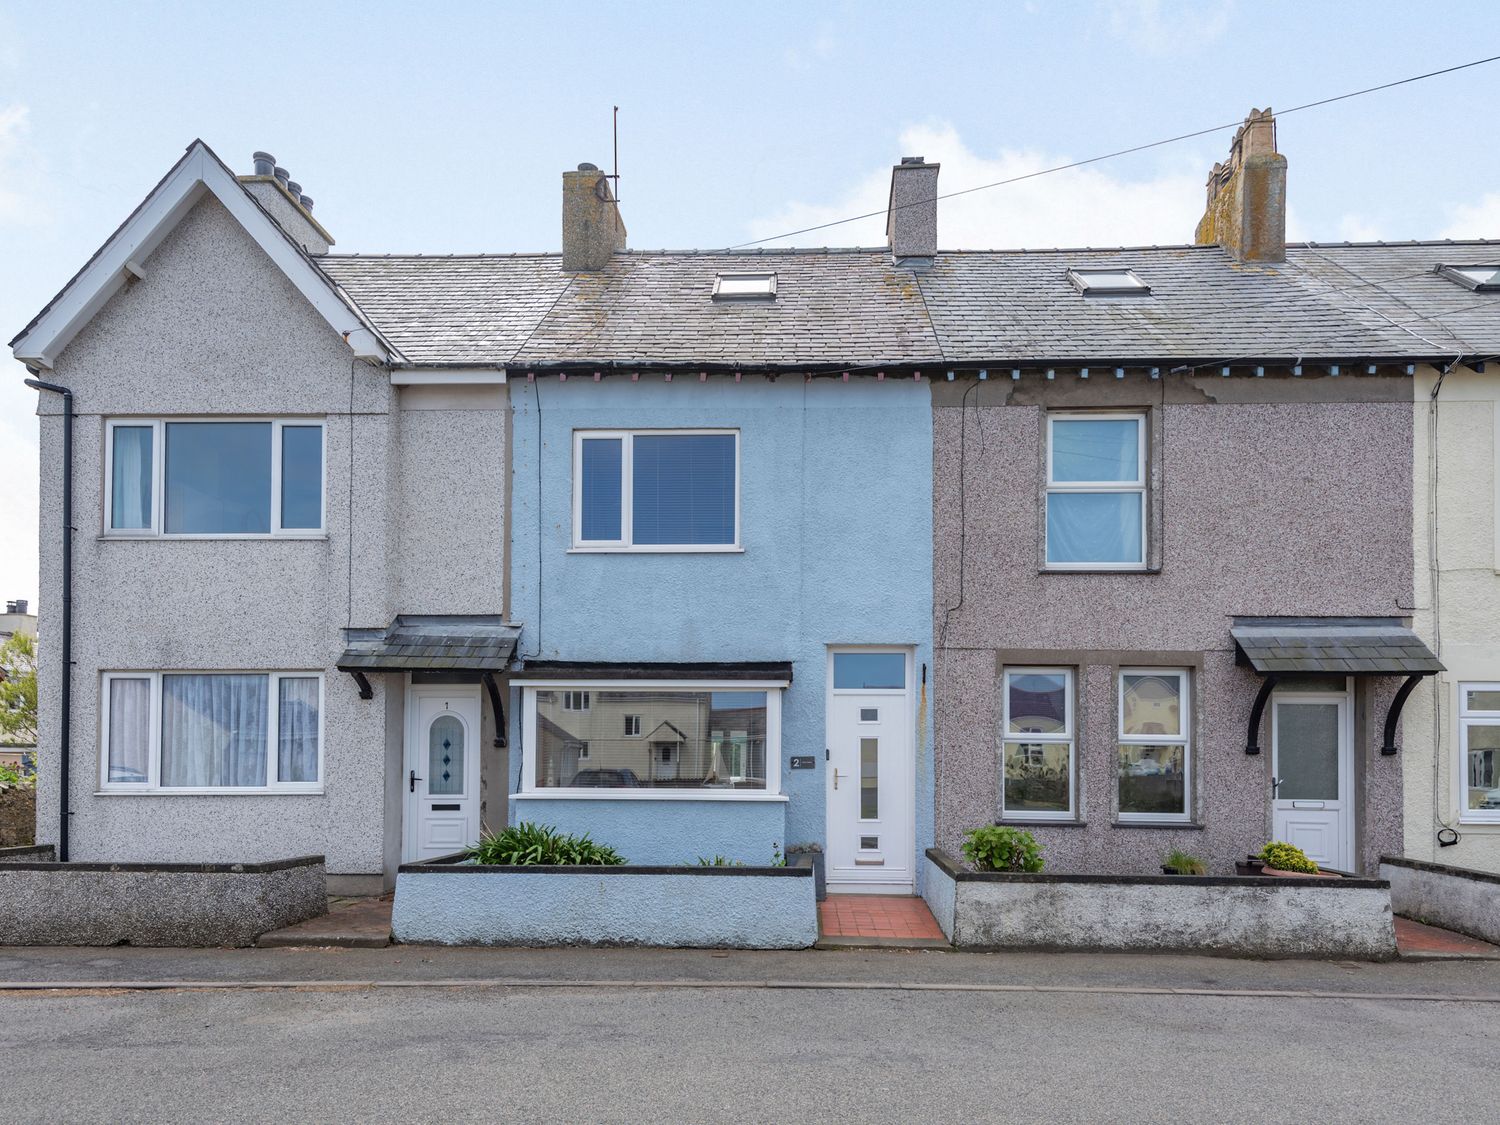 2 Tregof Terrace - Anglesey - 936705 - photo 1